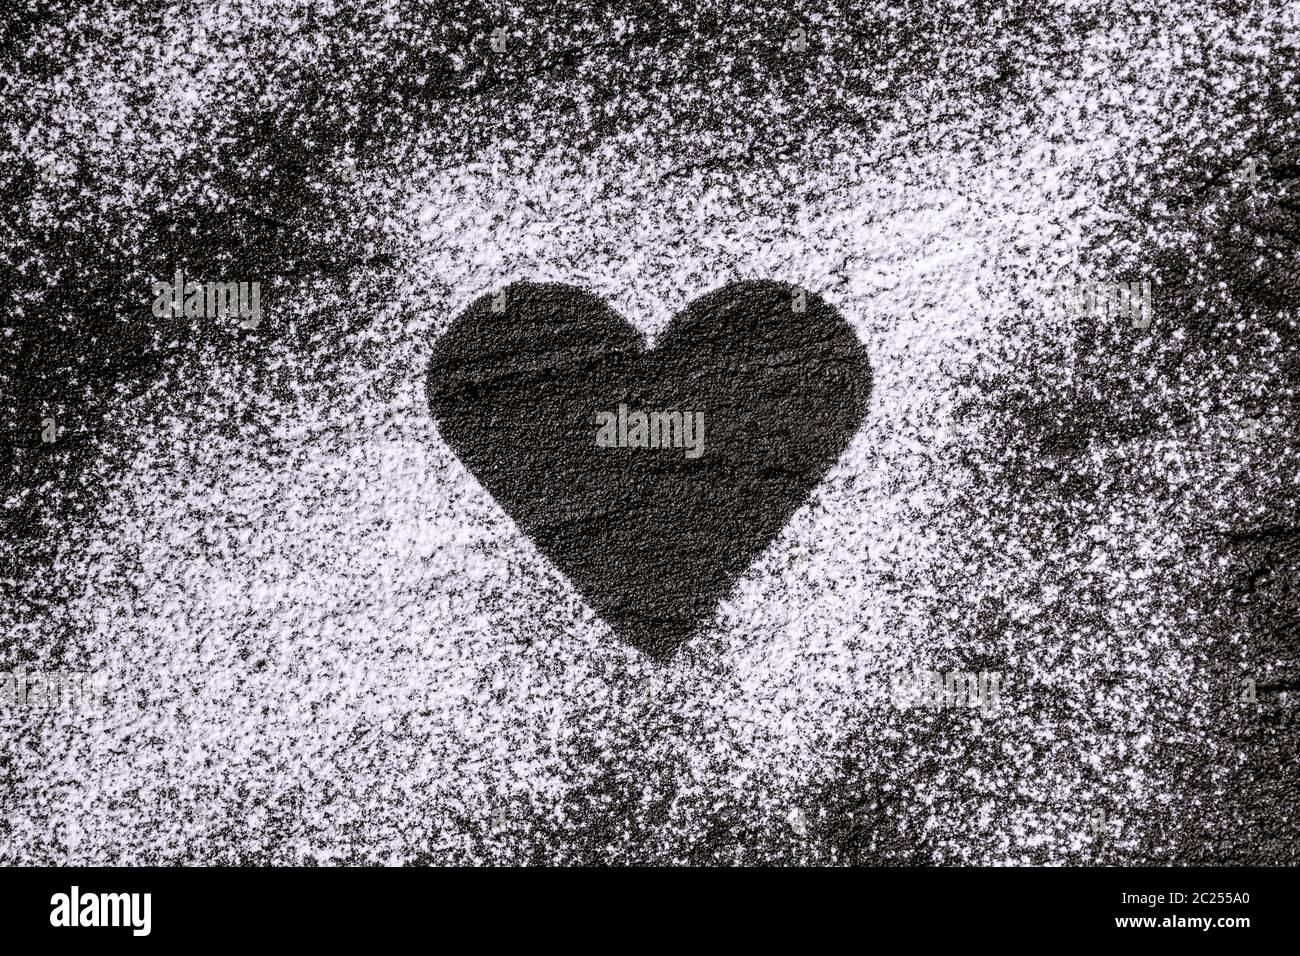 heart made of flour, icing sugar on black concrete Stock Photo